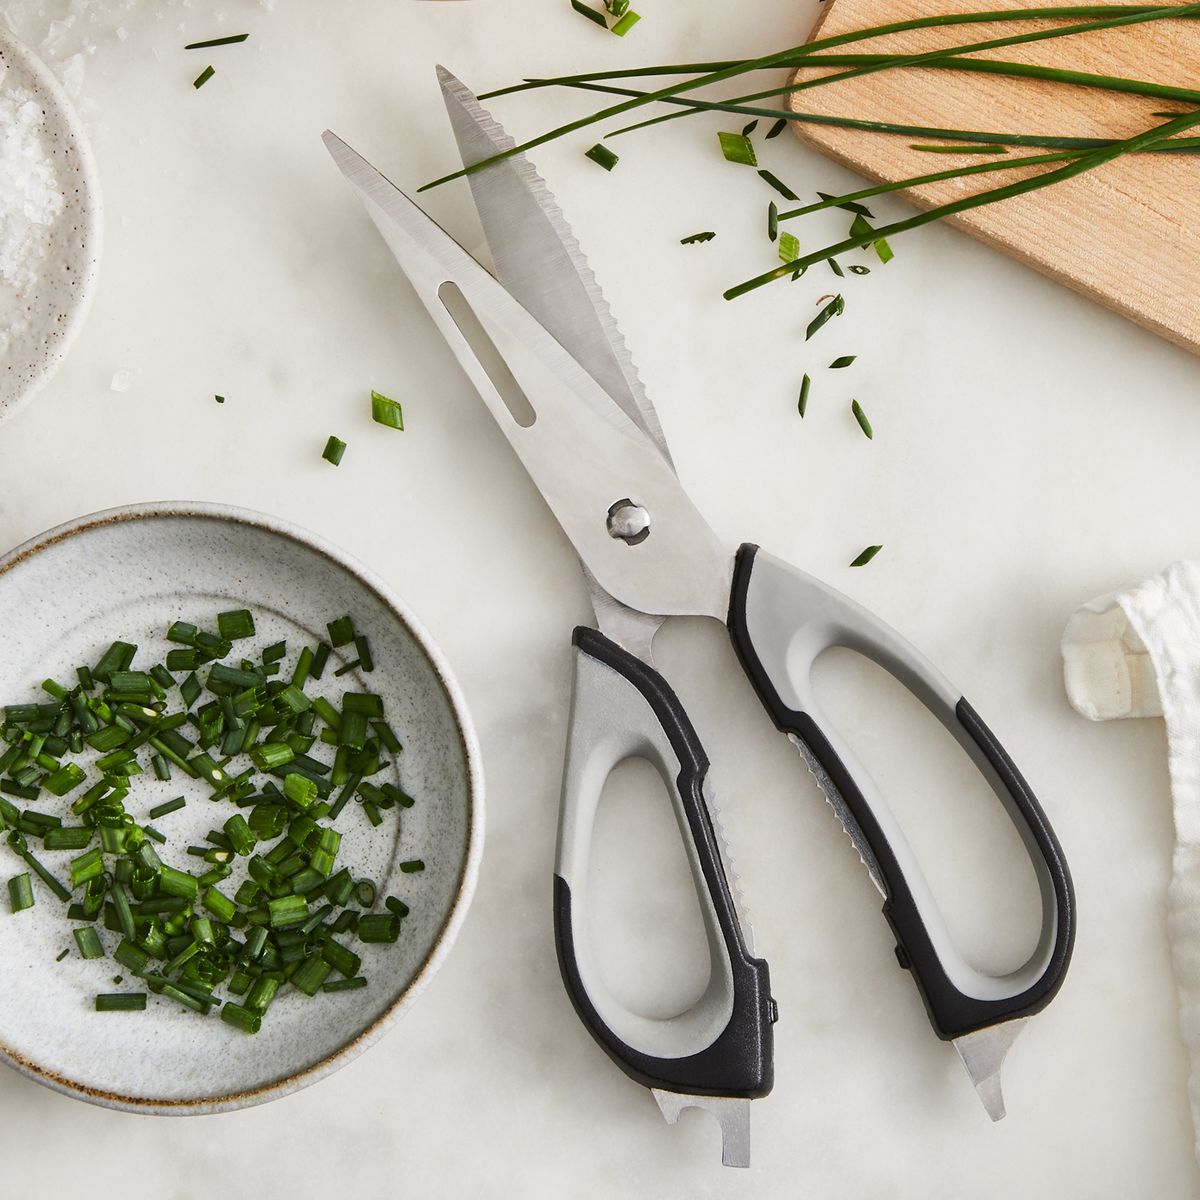 Best Kitchen Shears—Kitchen Shears from the ER